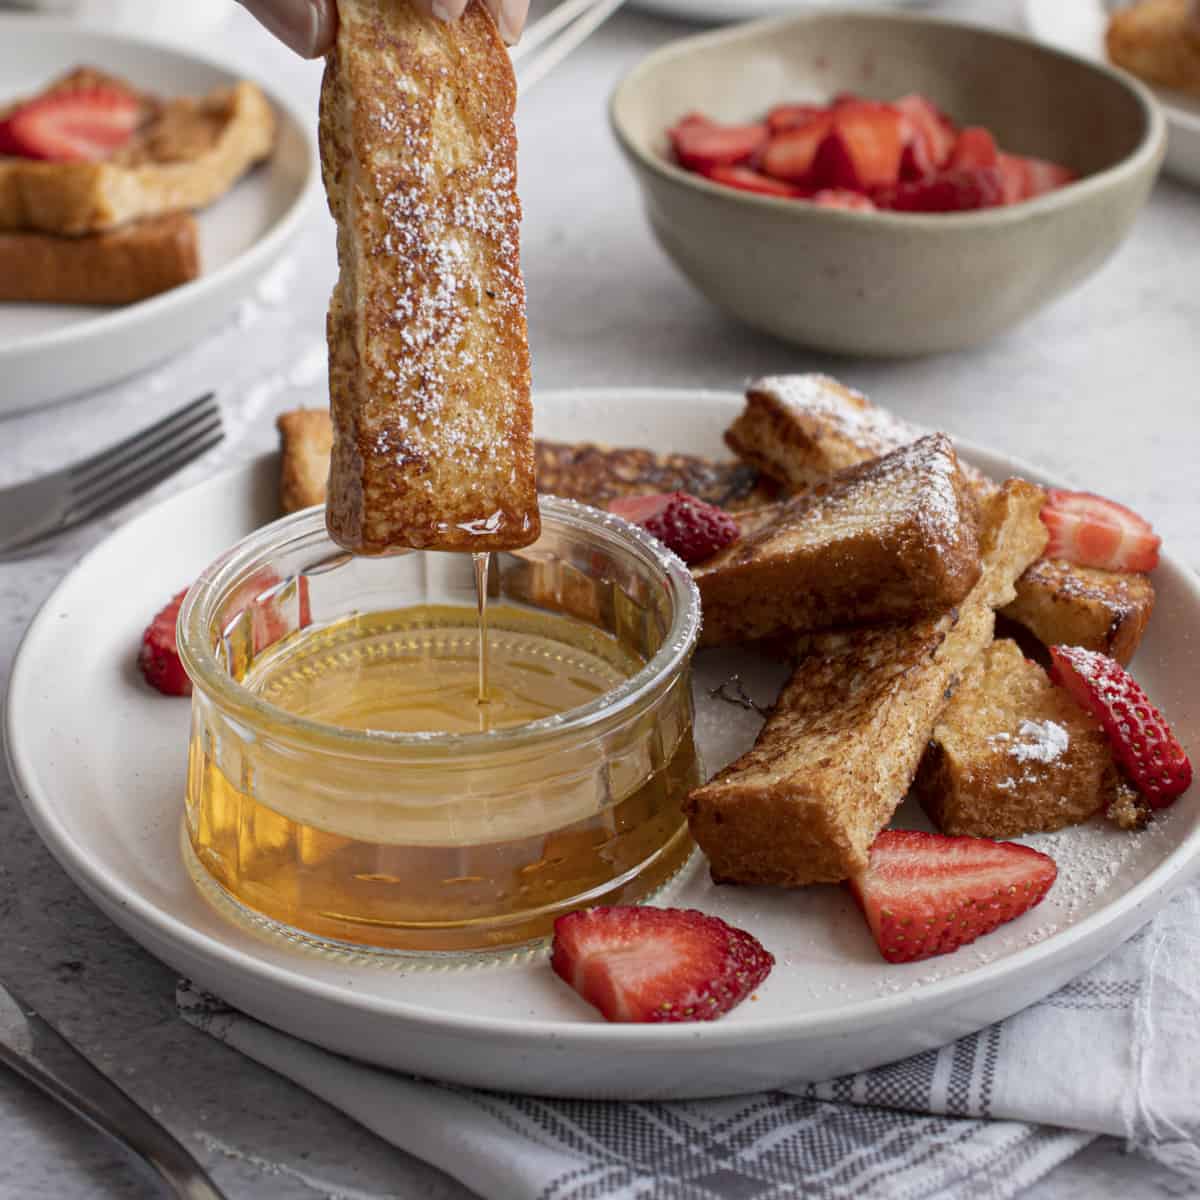 French toast sticks being dipping into maple syrup with strawberries on the side.